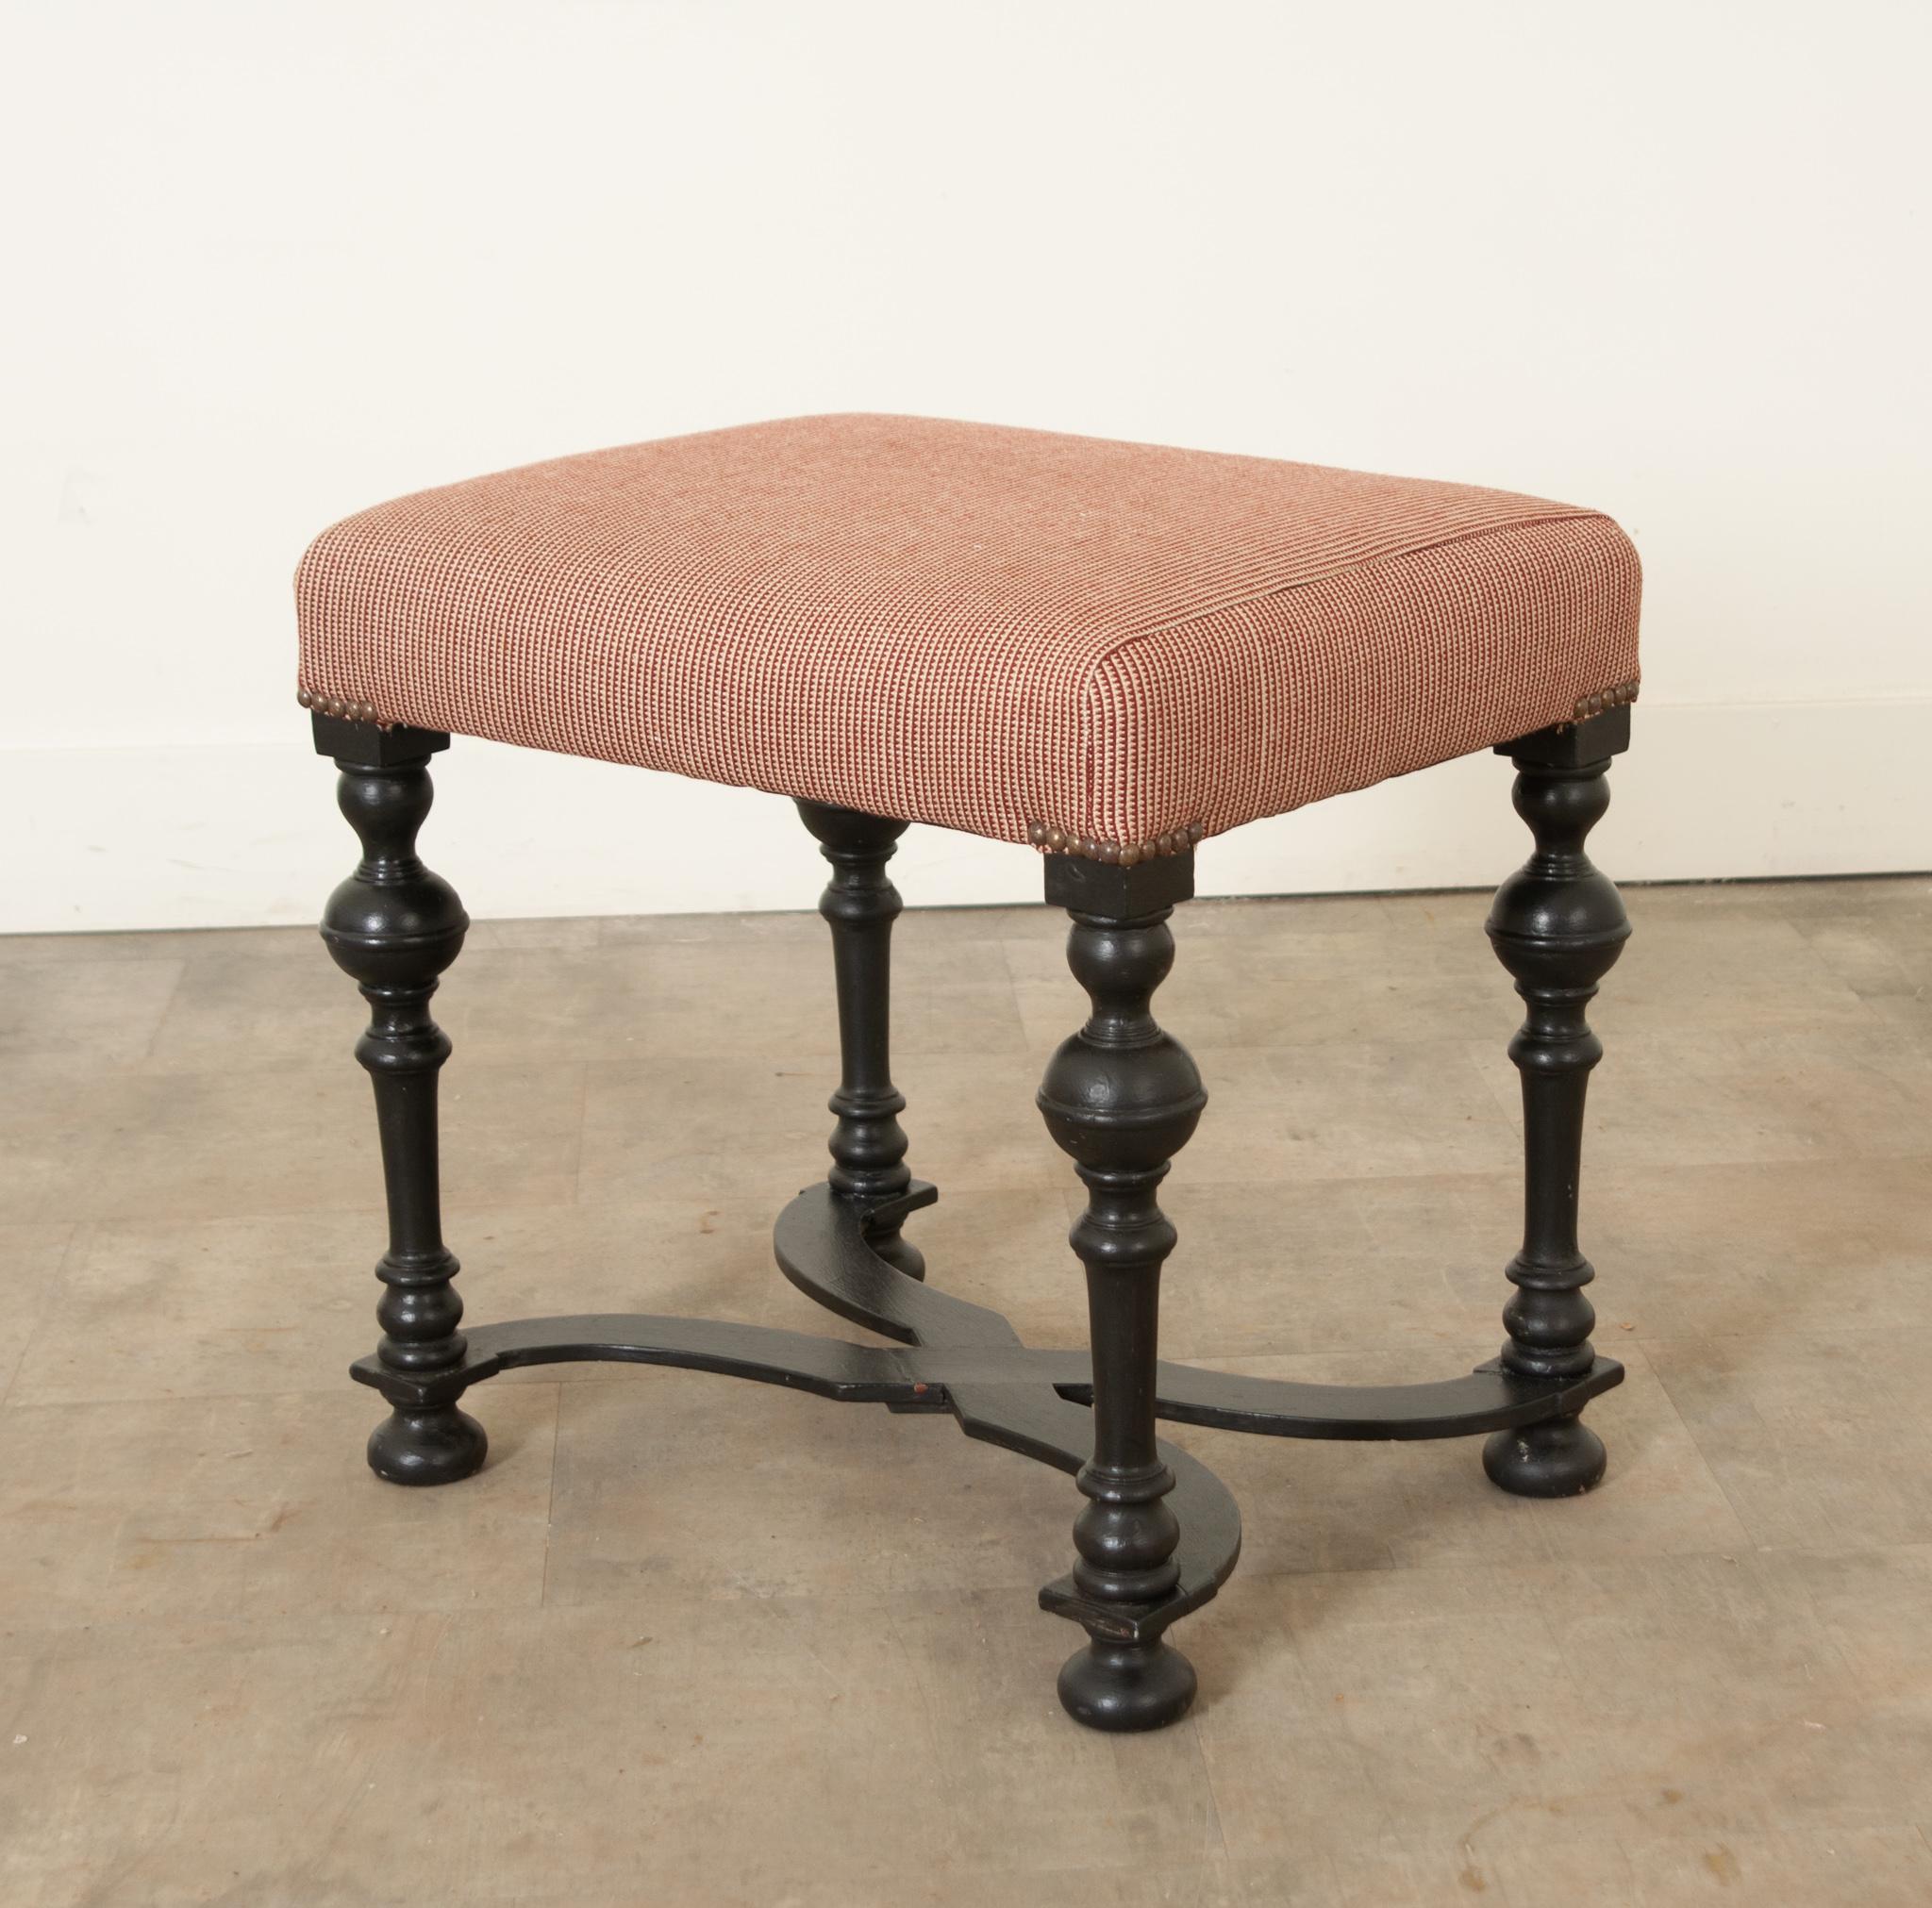 This dignified stool is the perfect antique to add interest to any space. Upholstered with a new deep red and cream patterned fabric and held with new round brass nailheads. The heavy solid painted wood frame showcases hand-carved elements